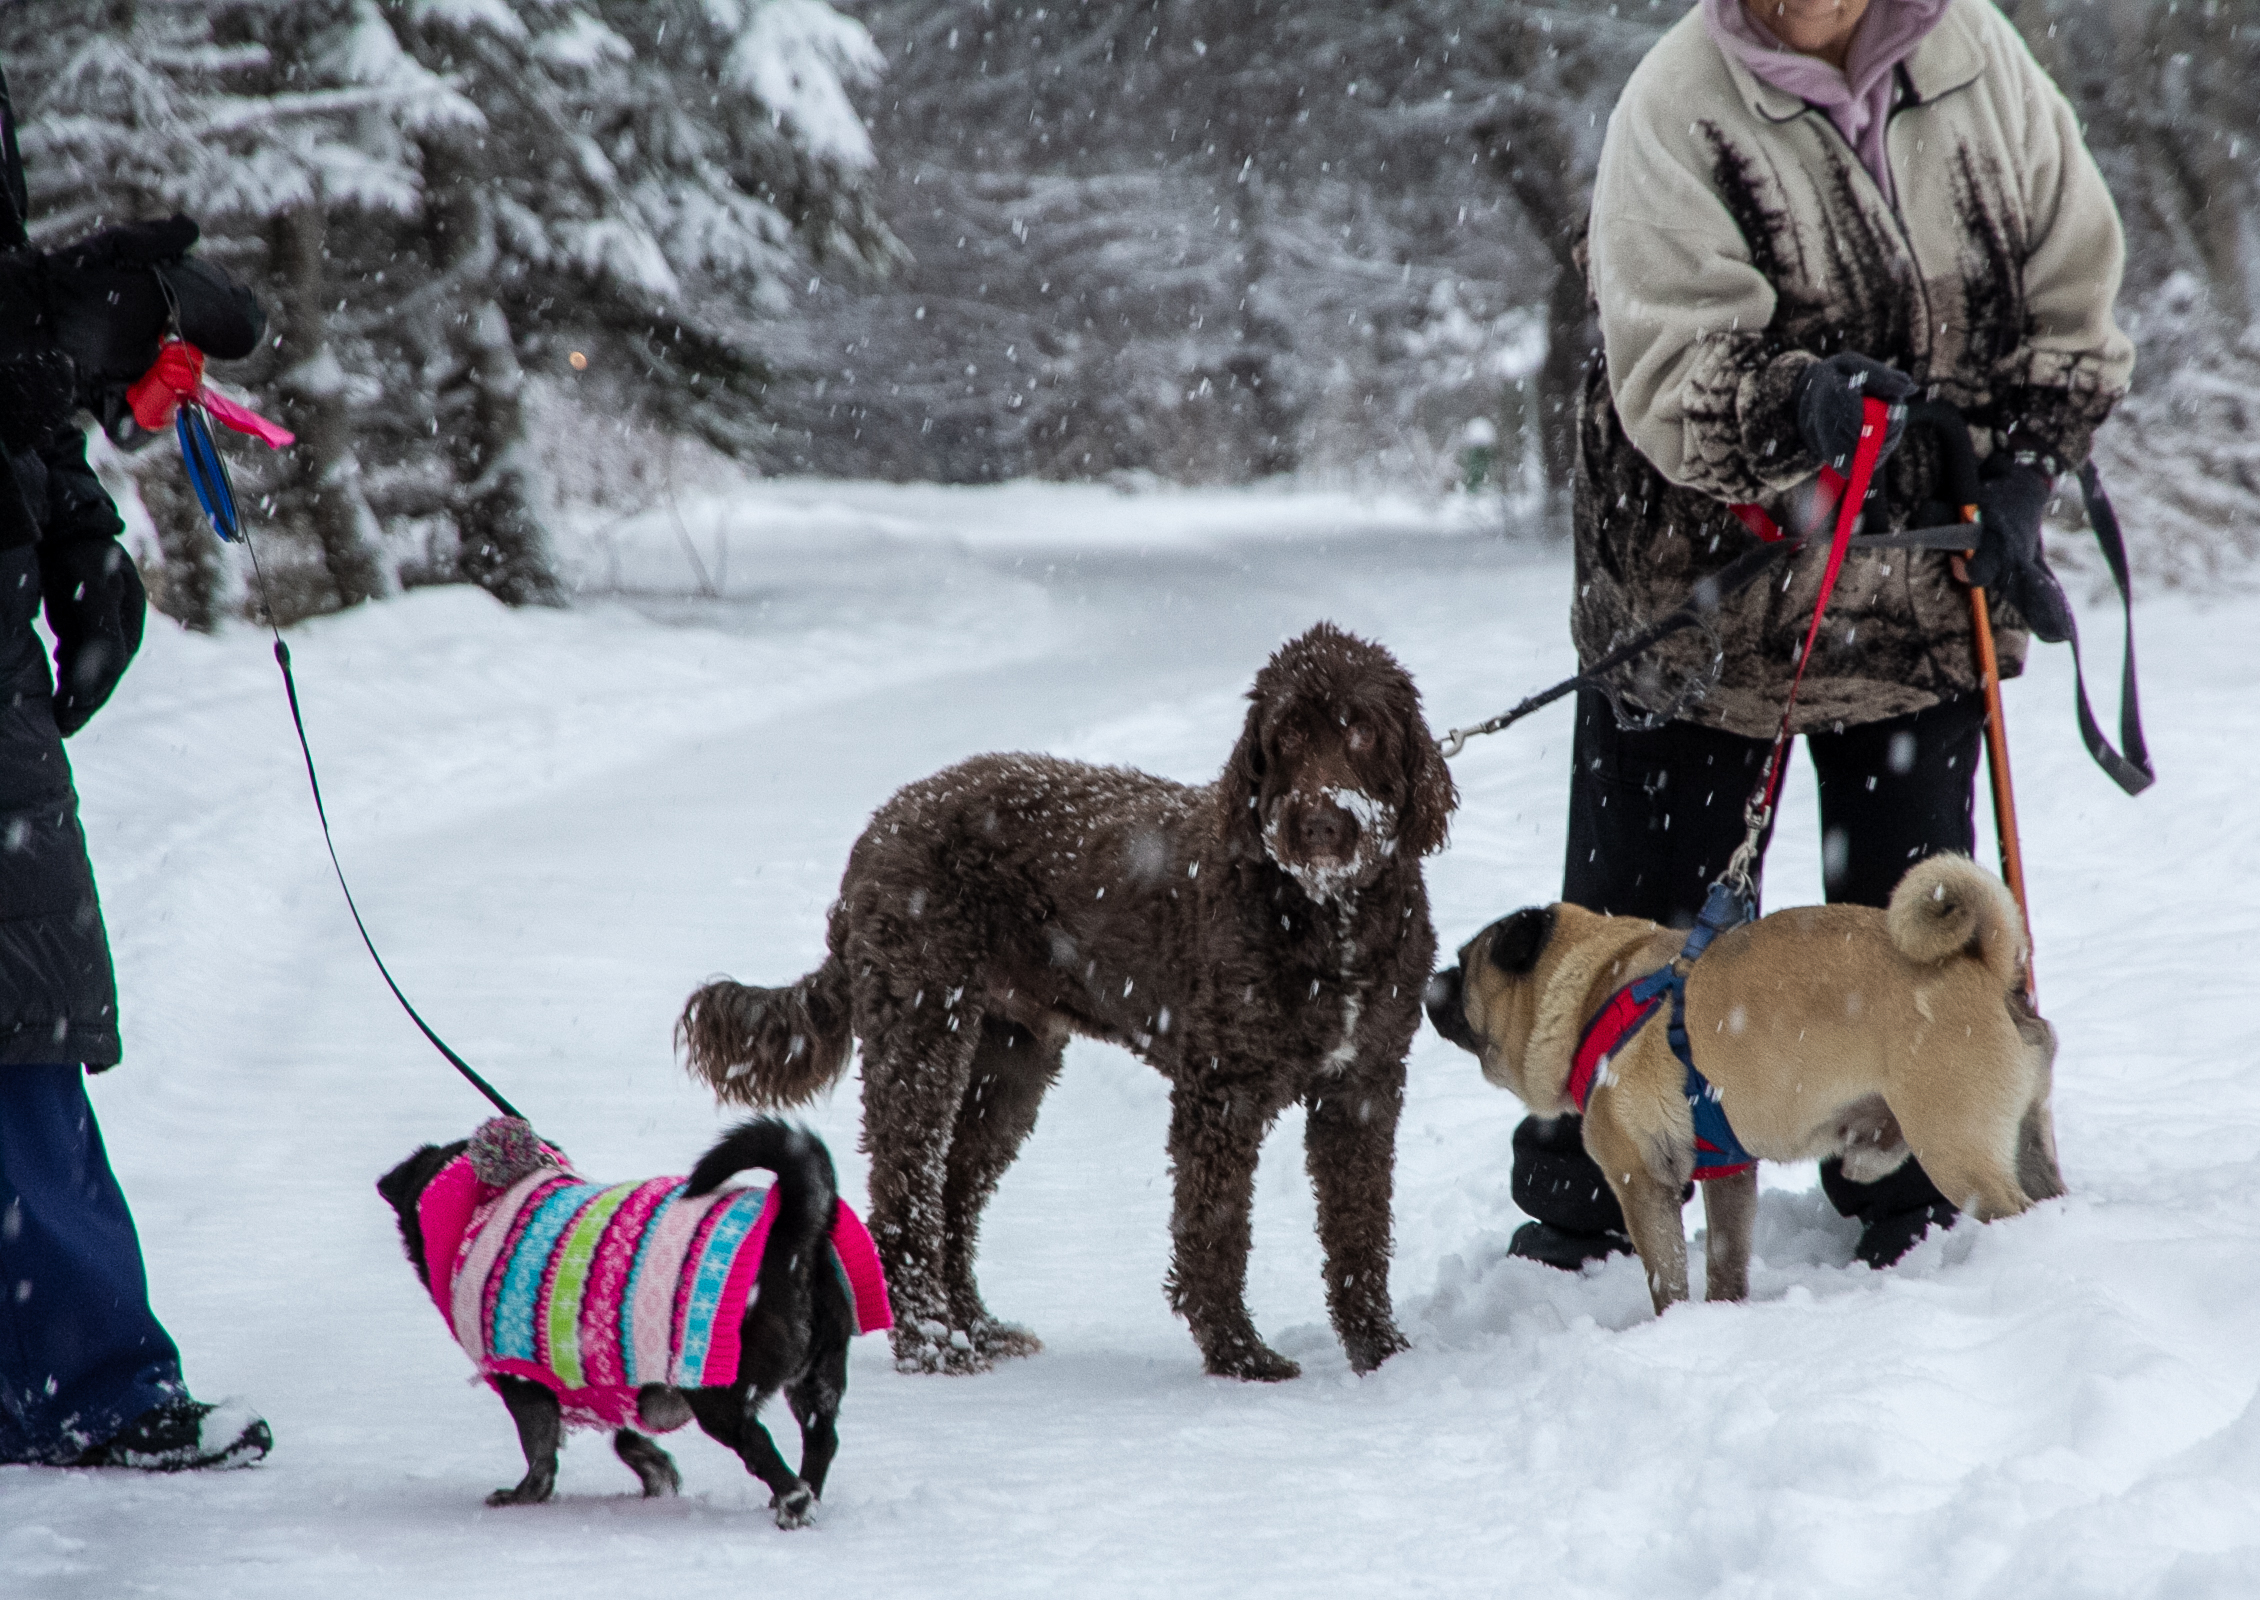 Three dogs on leashes interact as snow falls.